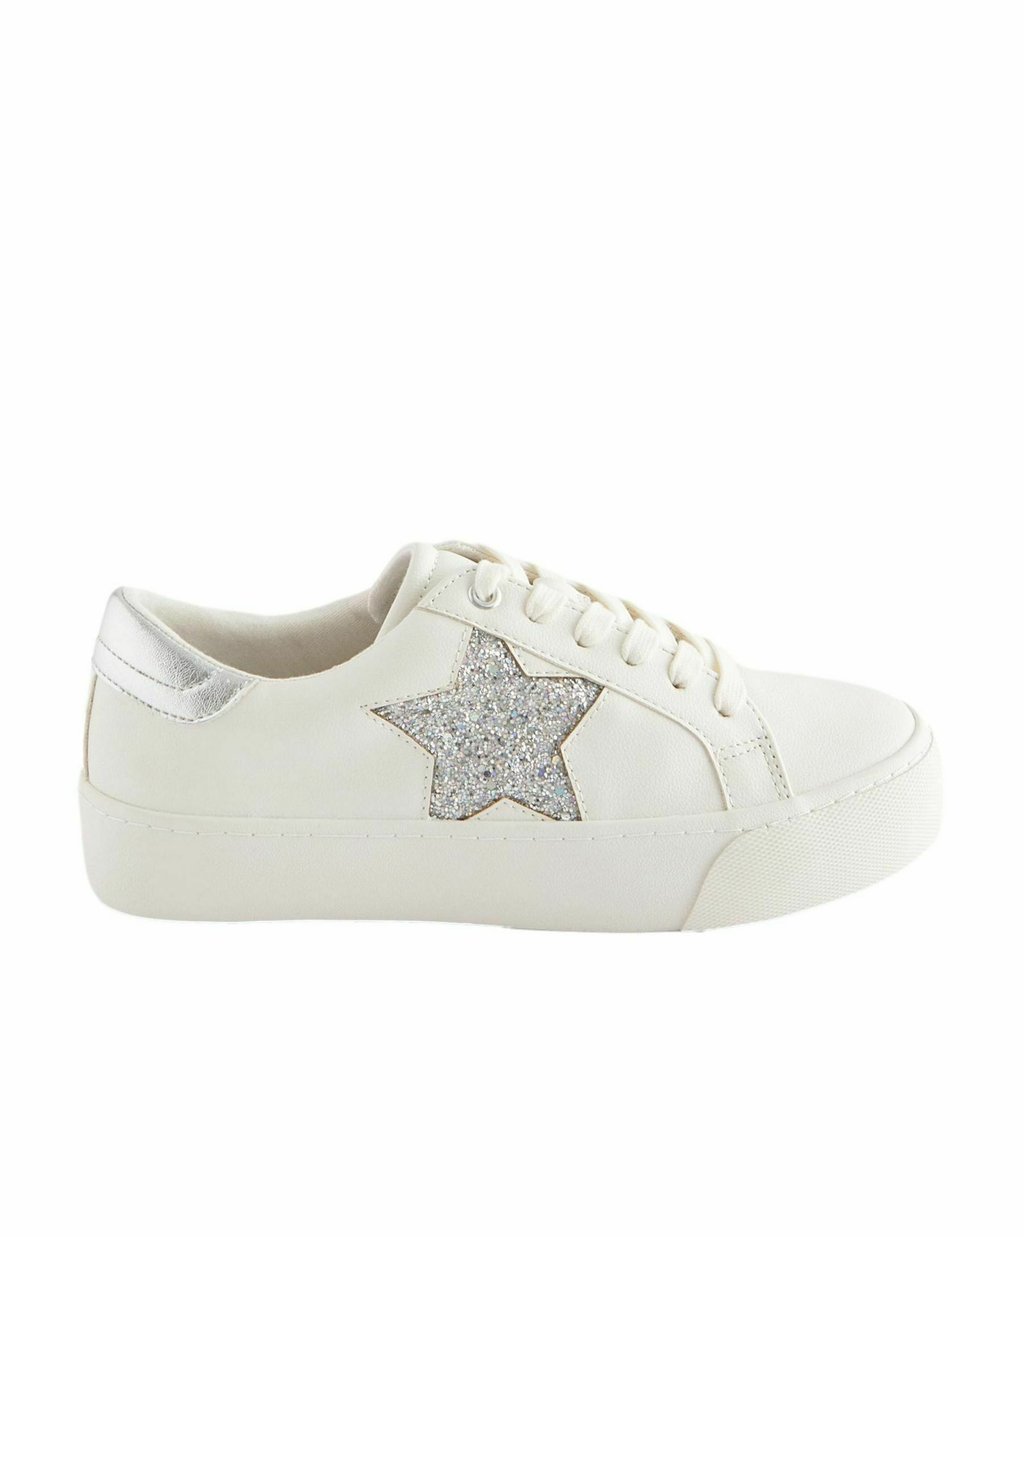 Низкие кроссовки Forever Comfort Chunky Star Regular Fit Next, цвет white silver кроссовки next forever comfort embroidered star white silver